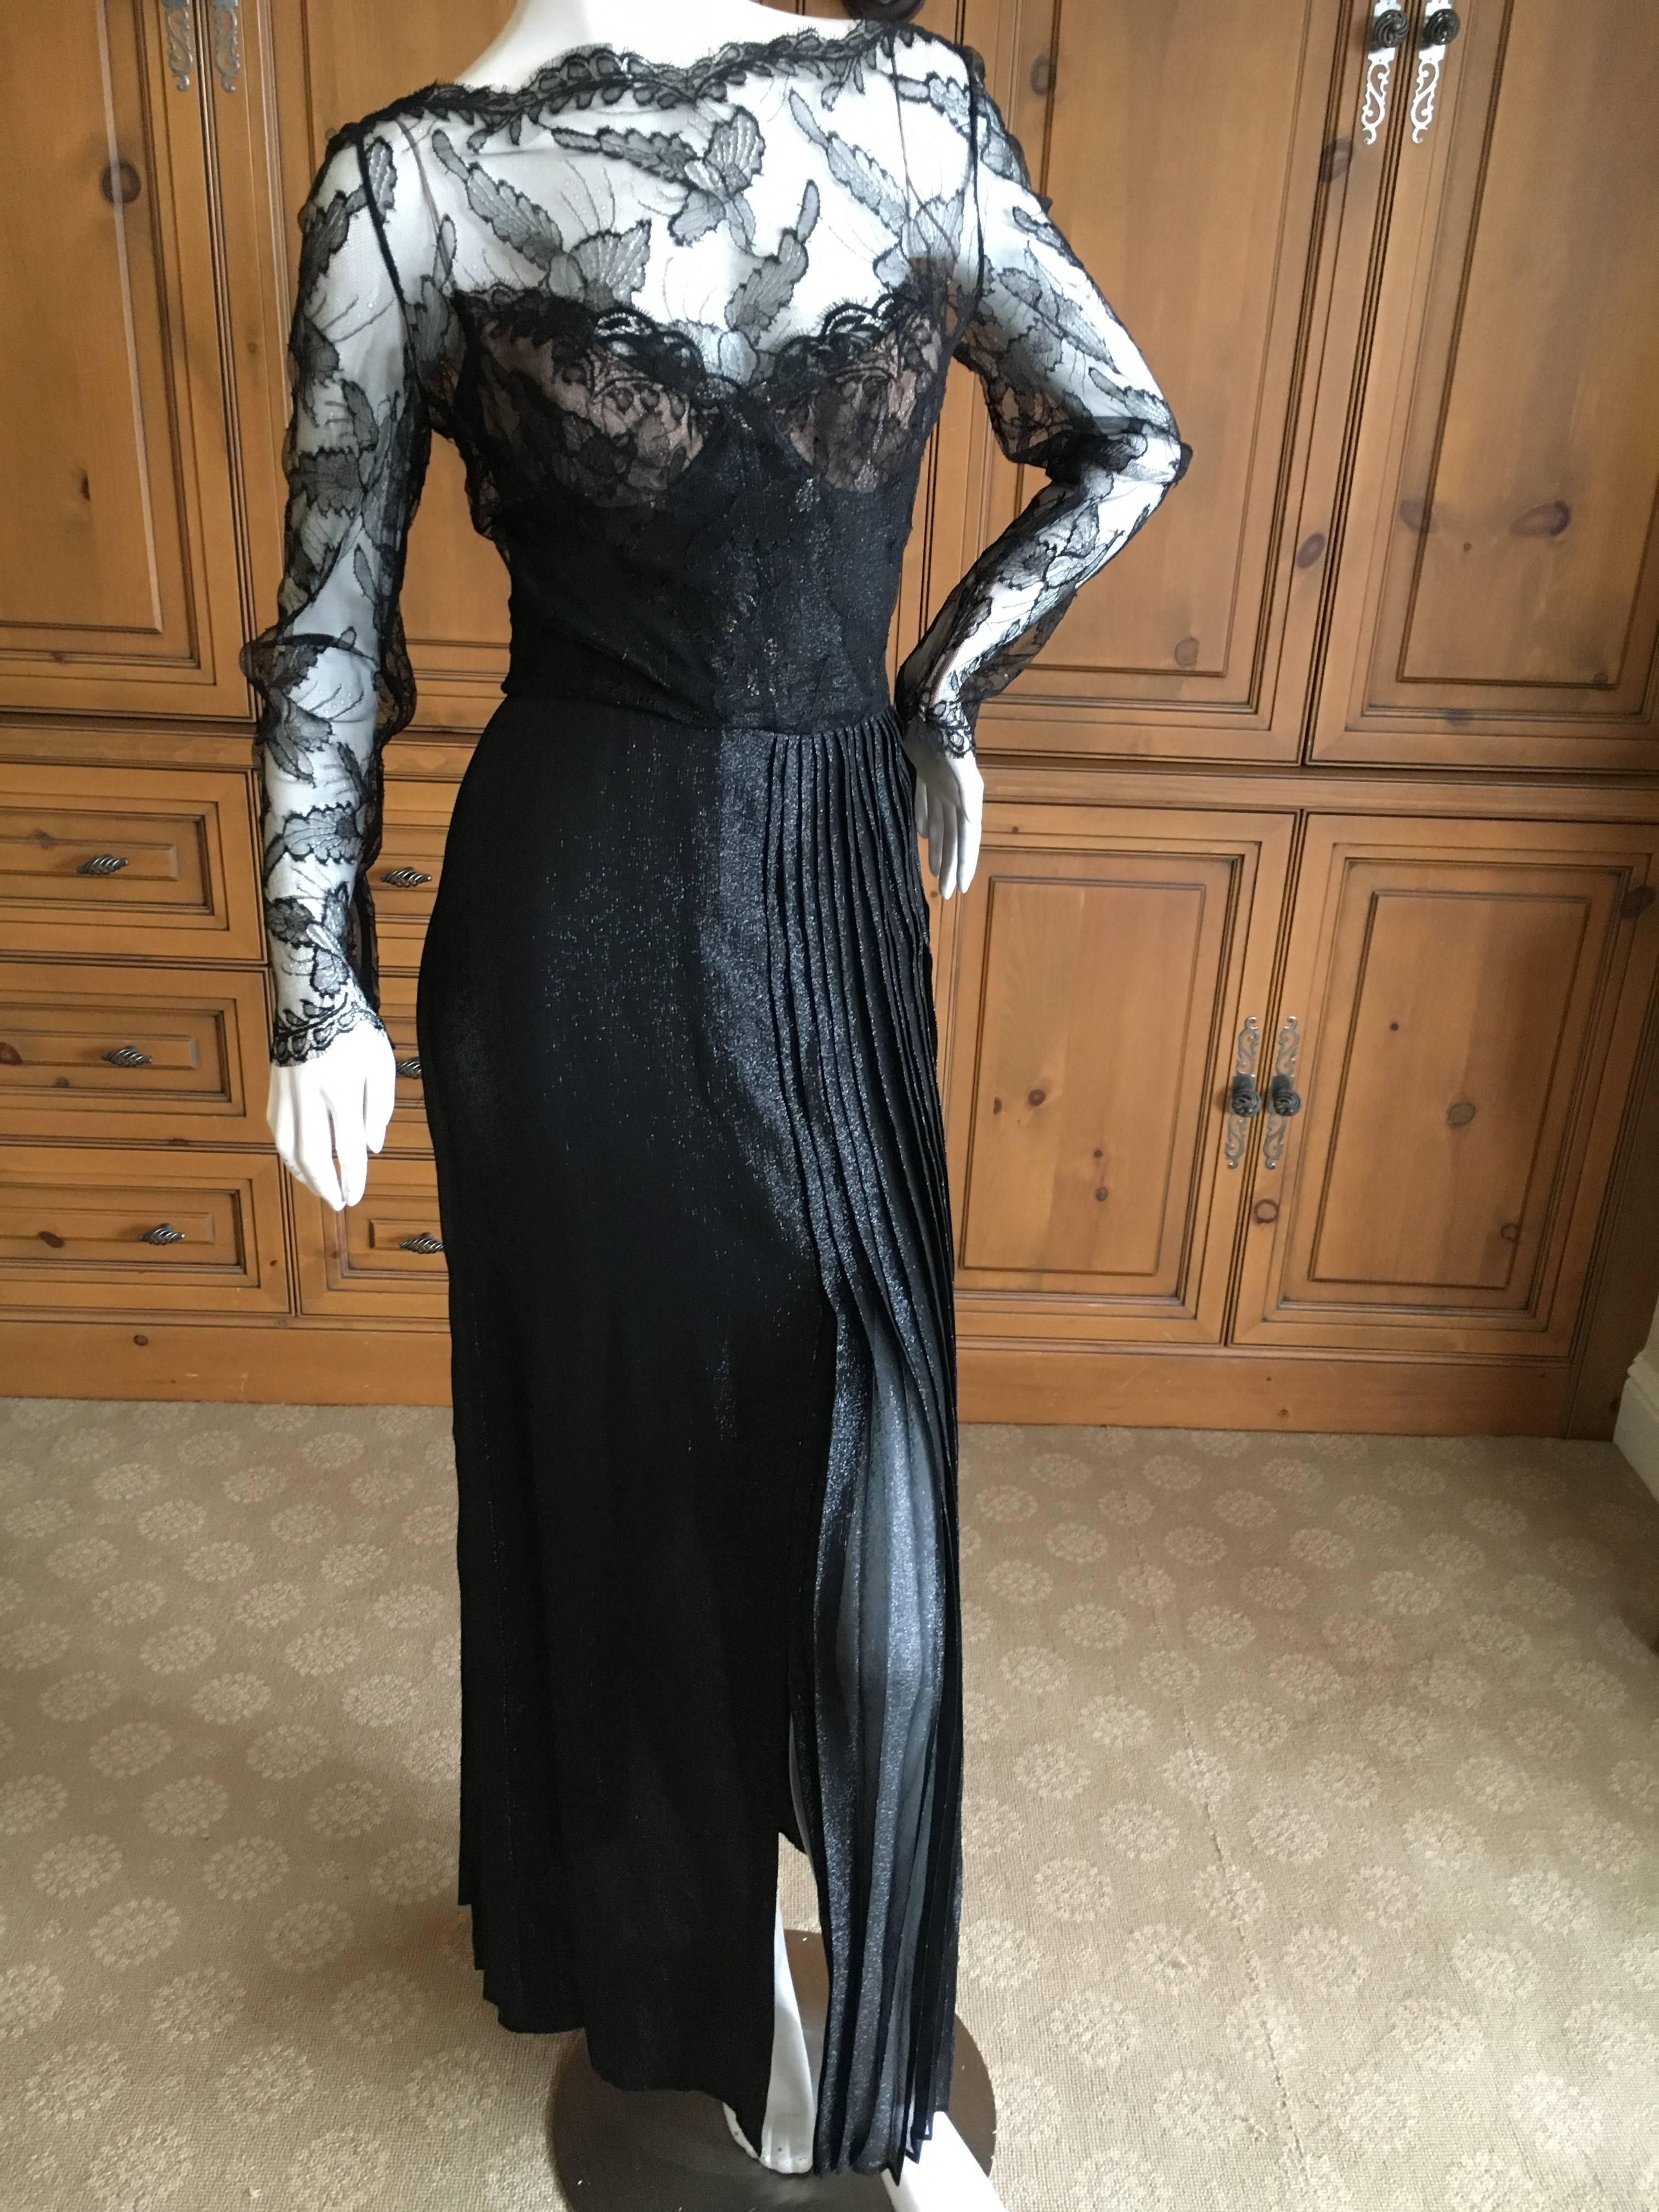 Galanos Black Lace Evening Dress with Pleated Skirt.
Size small
Bust 34"
Waist 28"
Hips 44"
Length 59"
Excellent condition
James Galanos was considered America's answer to the French Couture.  Everything hand finished , inside